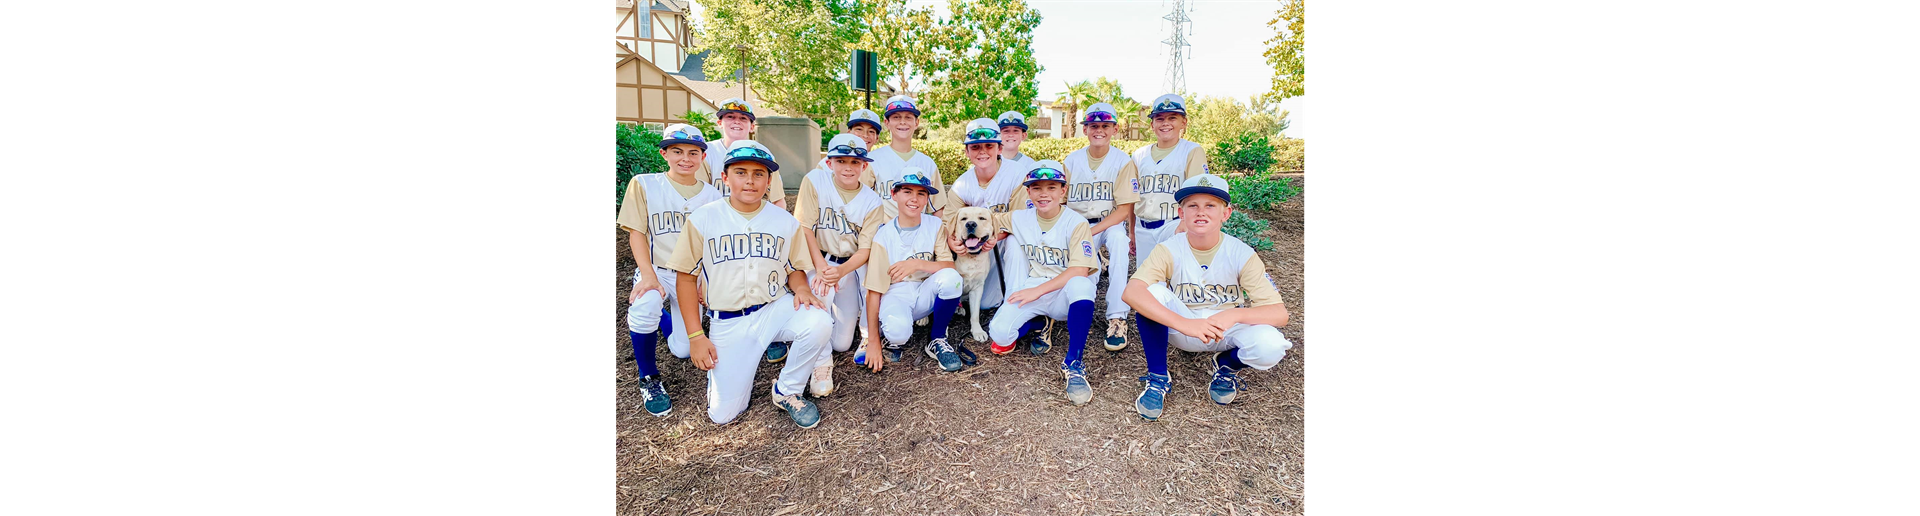 Welcome to Ladera Ranch Little League!